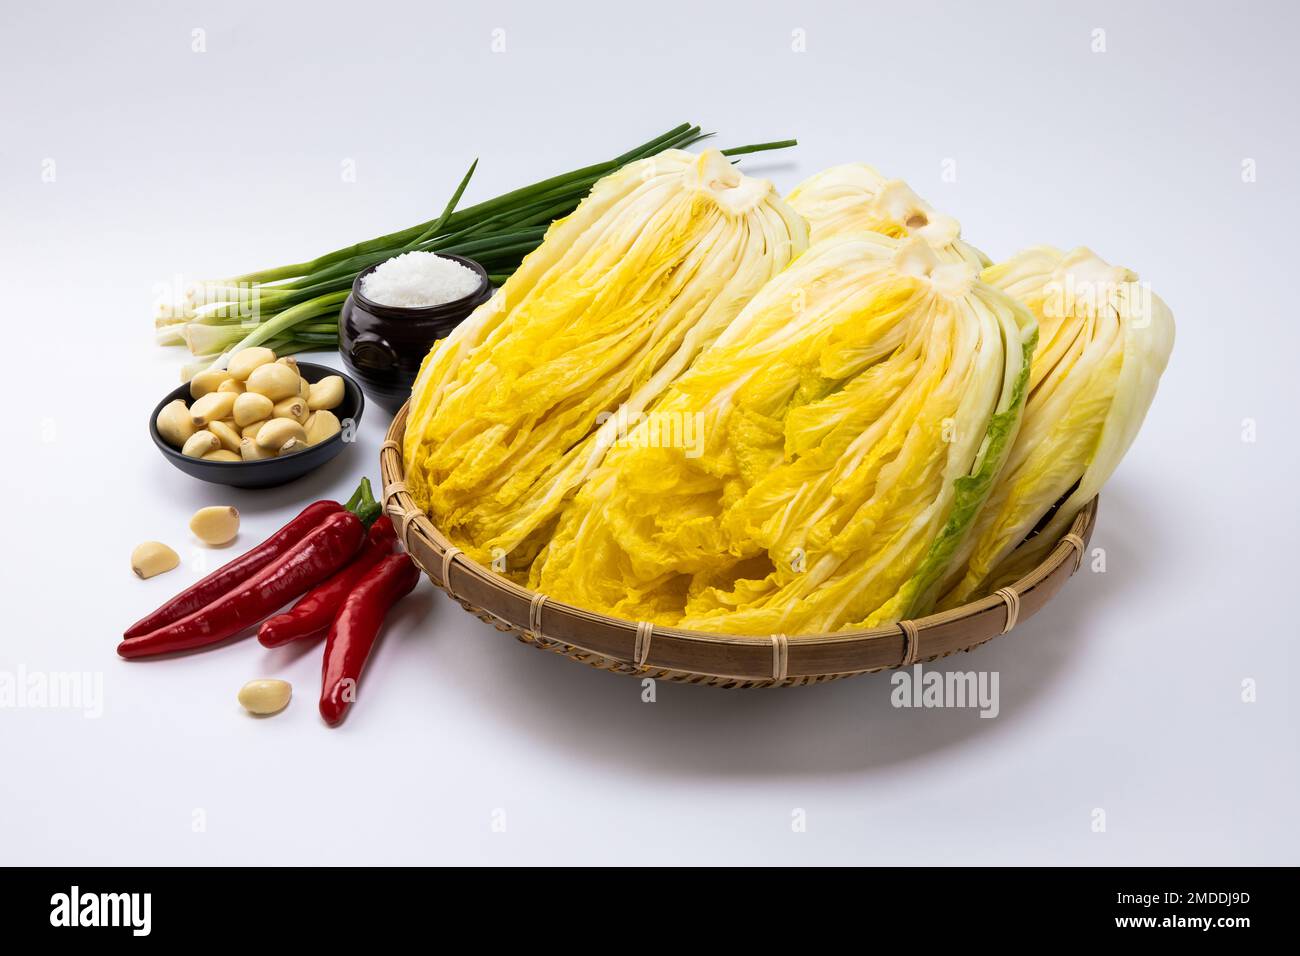 Kimchi Cabbage. Korean traditional, kimchi ingredients, salted cabbage. Stock Photo